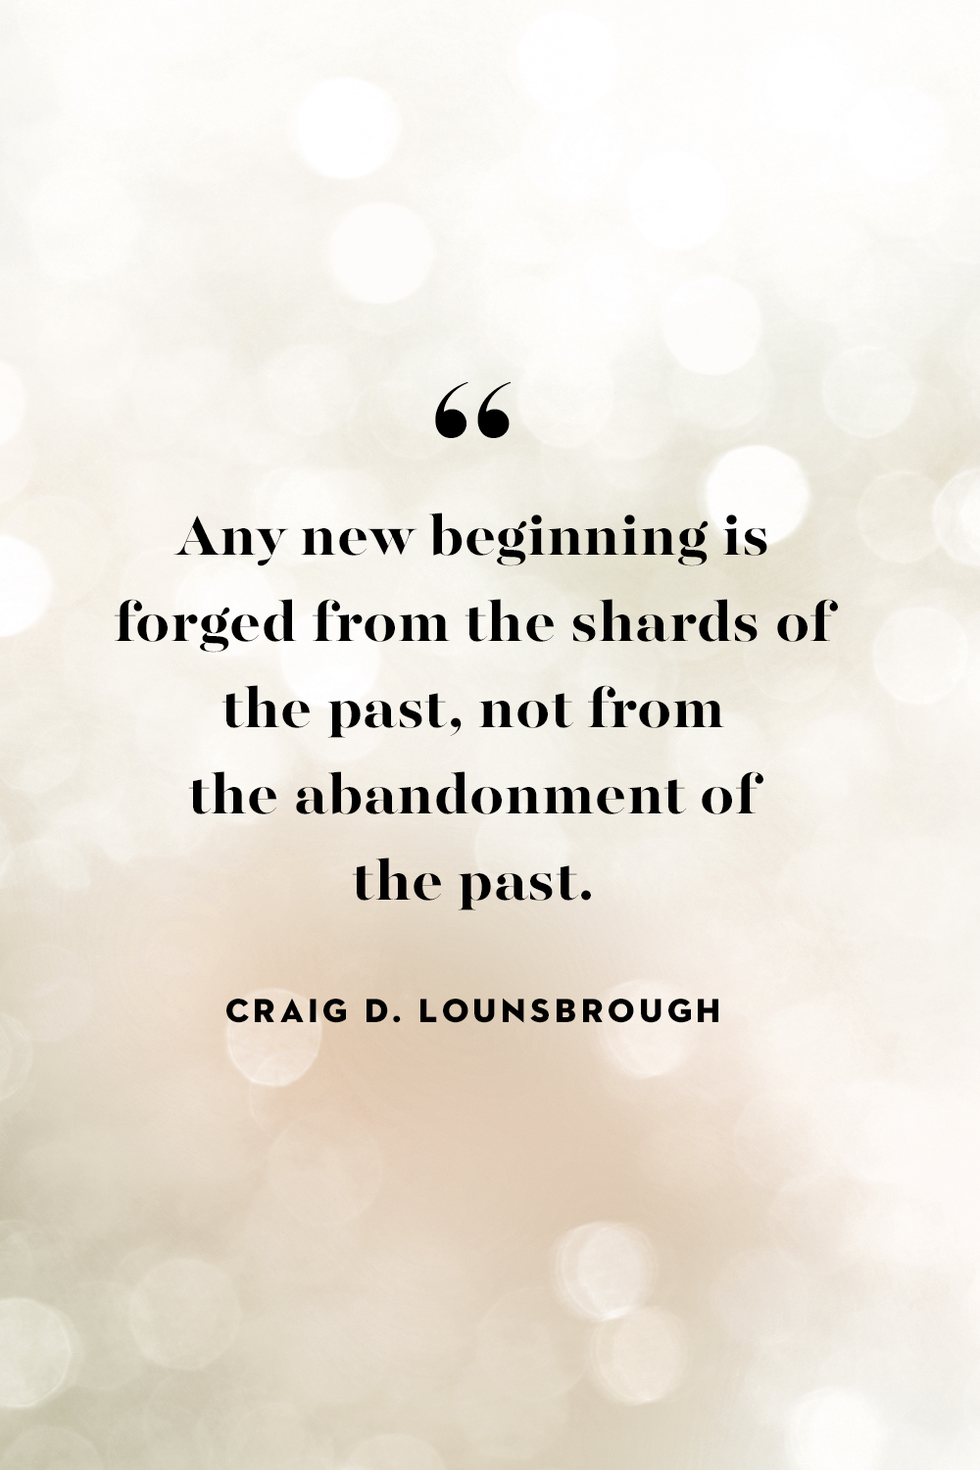 new year quote by craig d lounsbrough